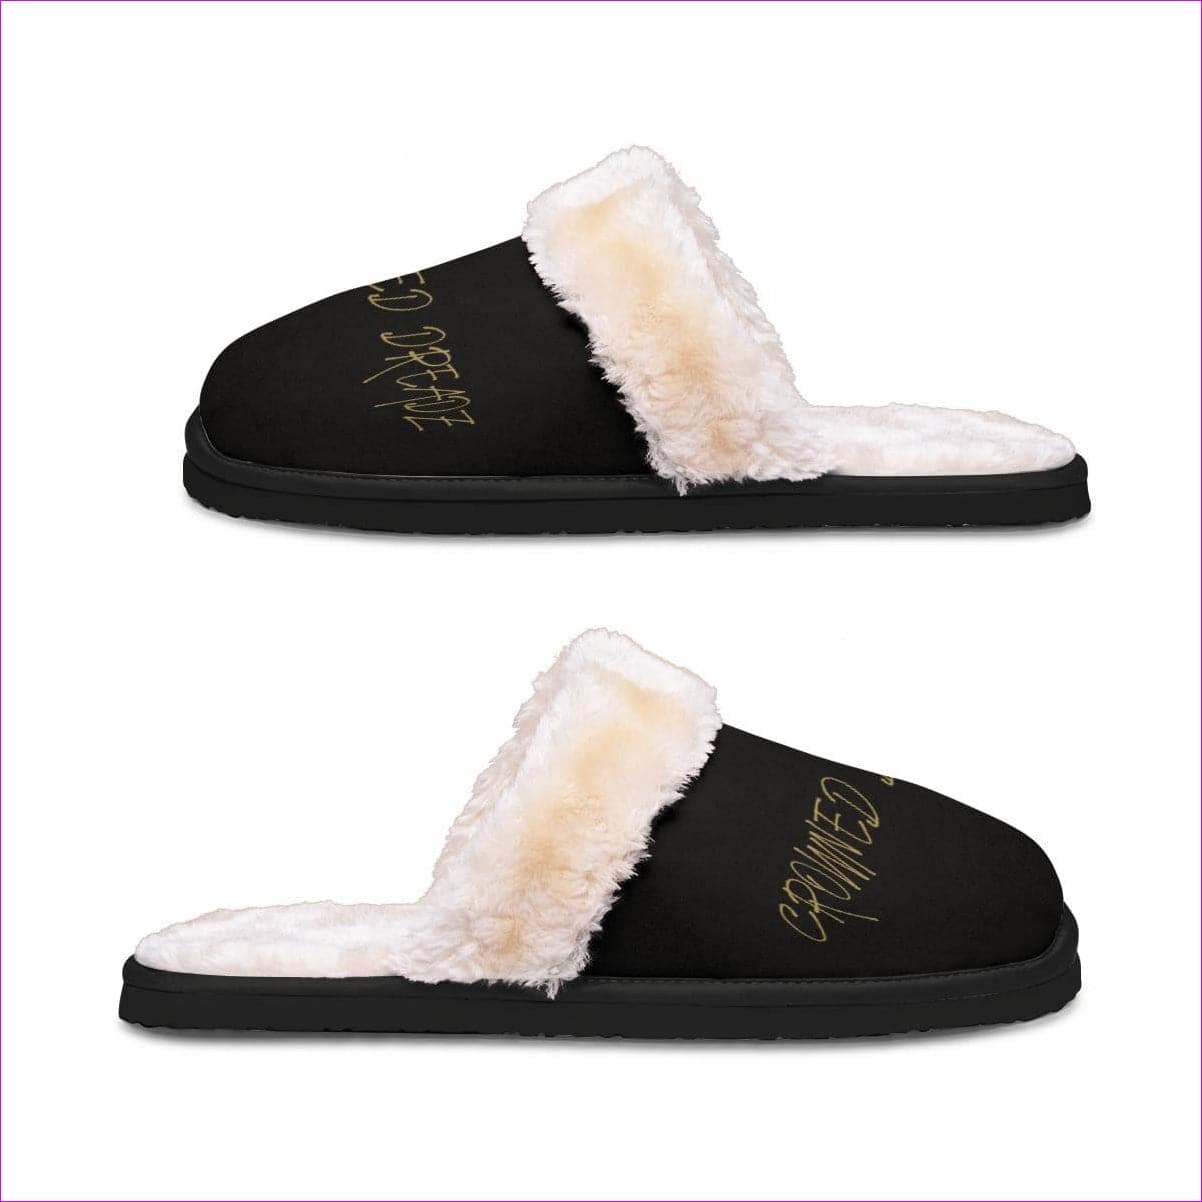 black - Men's Crowned dreadz Home Plush Slippers - mens slippers at TFC&H Co.